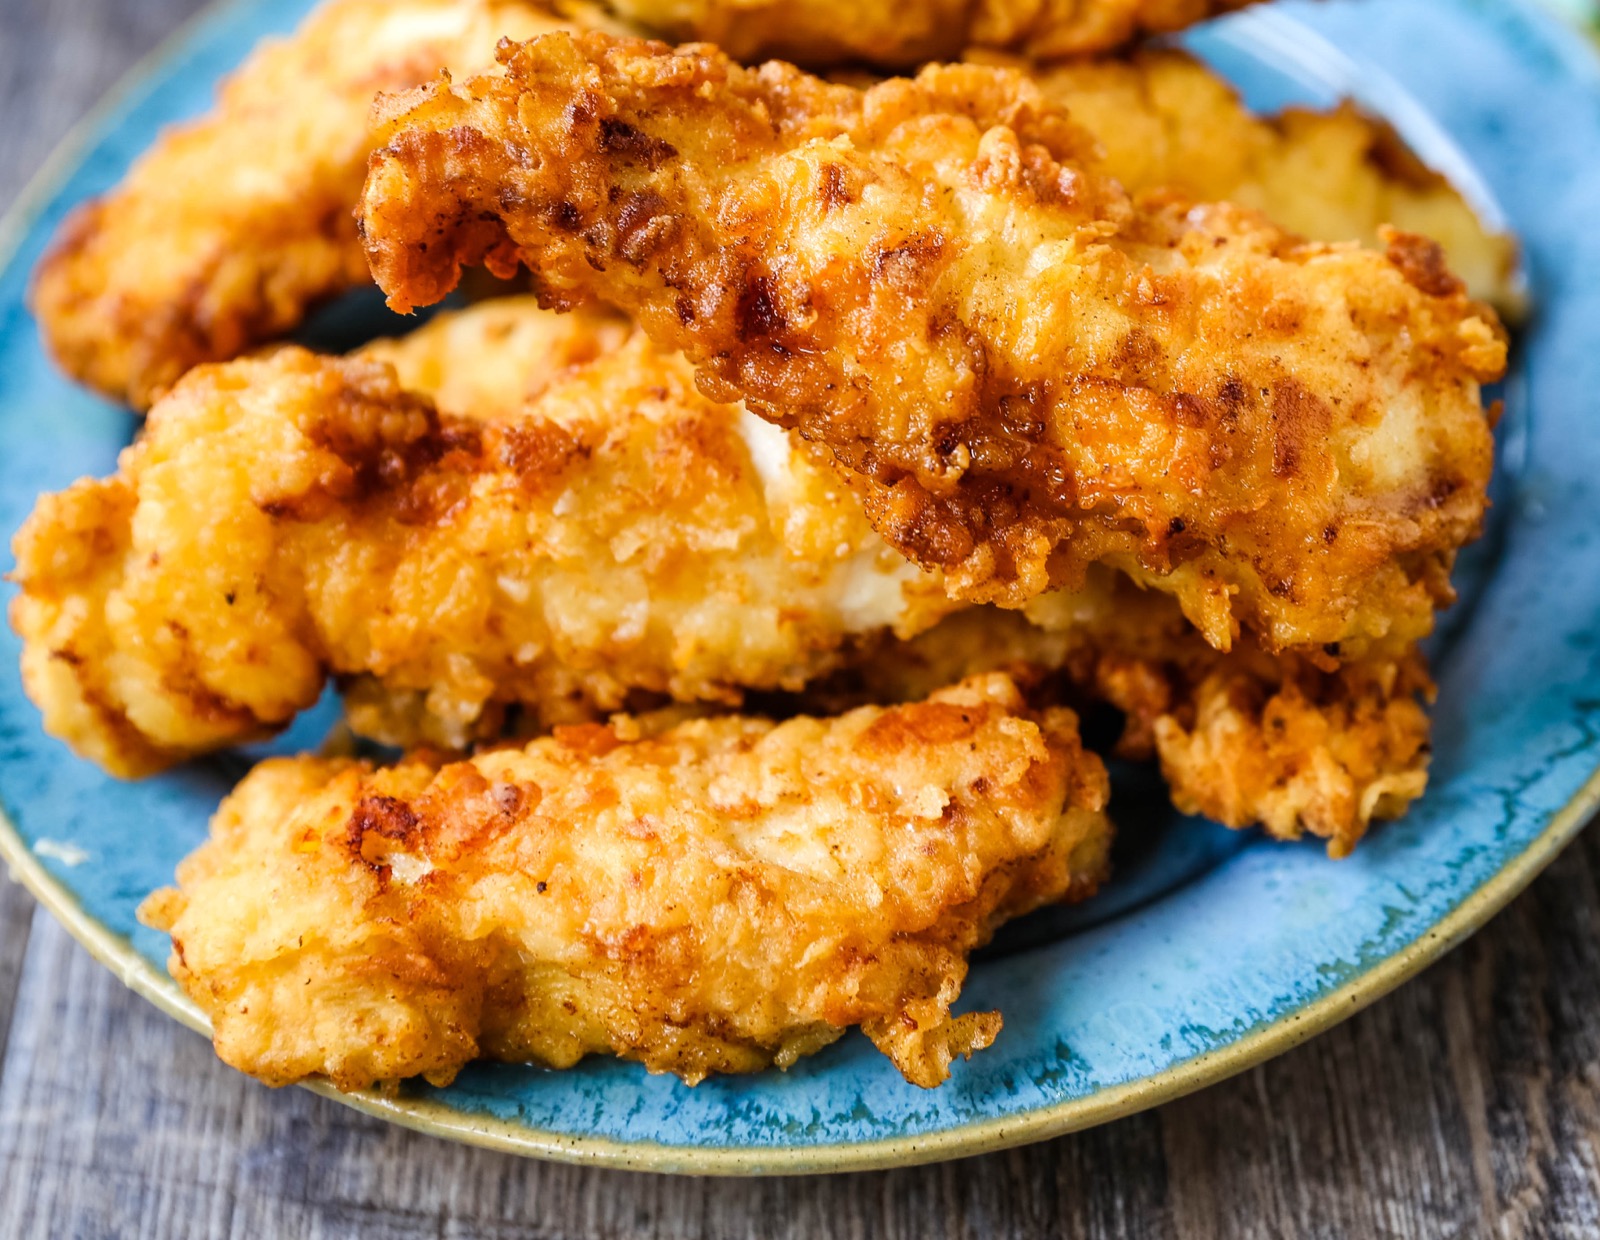 Sorry, But You’re a Picky Eater If You’ve Eaten 17/22 of These Foods Fried Chicken Strips